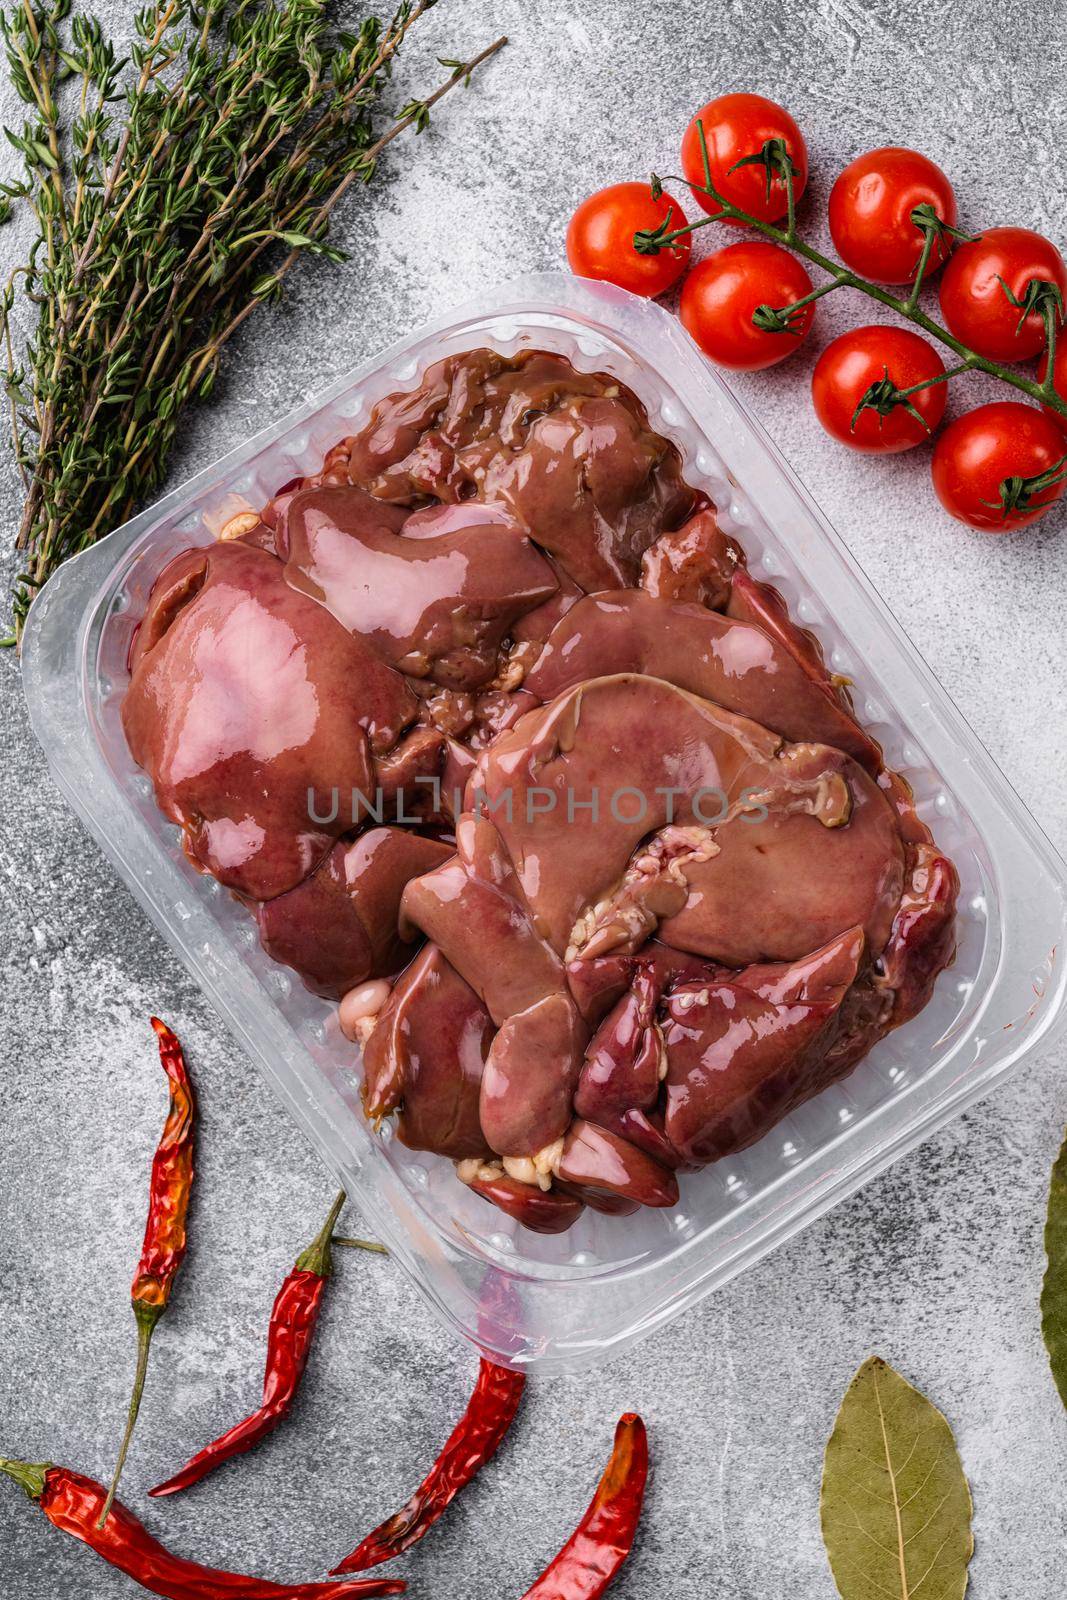 Poultry offal Chicken liver in a plastic container, on gray stone table background, top view flat lay by Ilianesolenyi